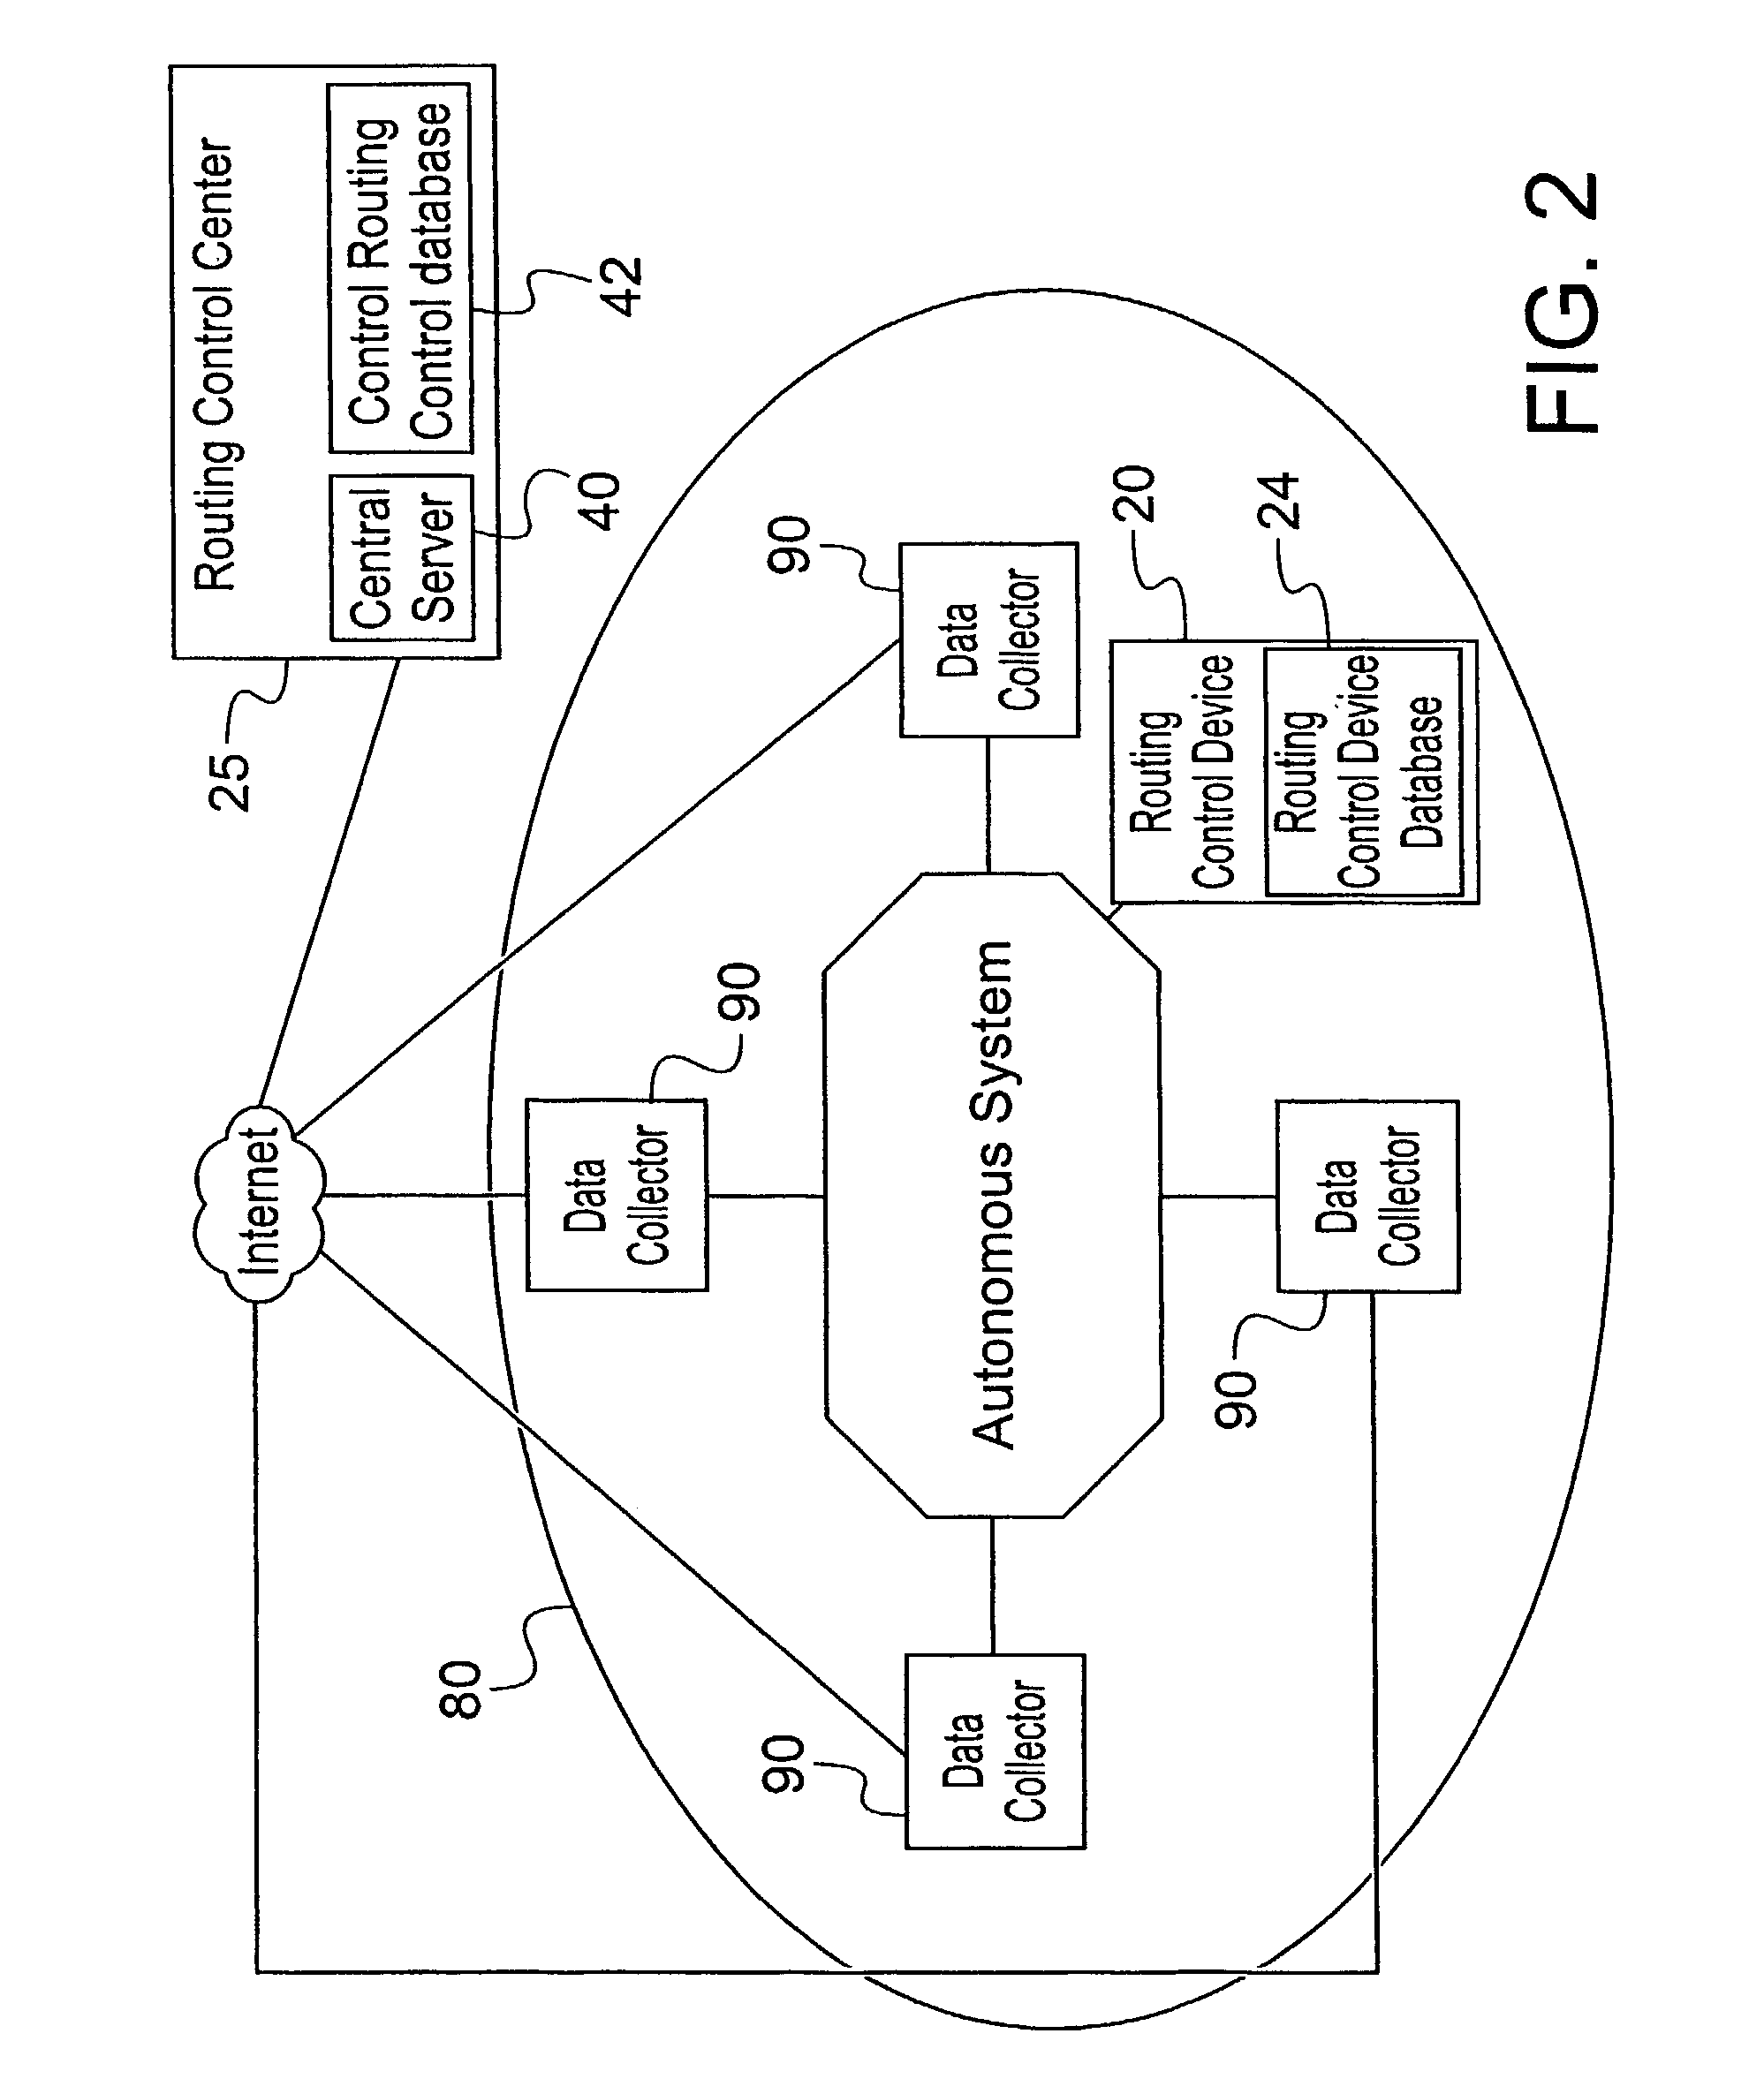 Methods, apparatuses and systems facilitating determination of network path metrics